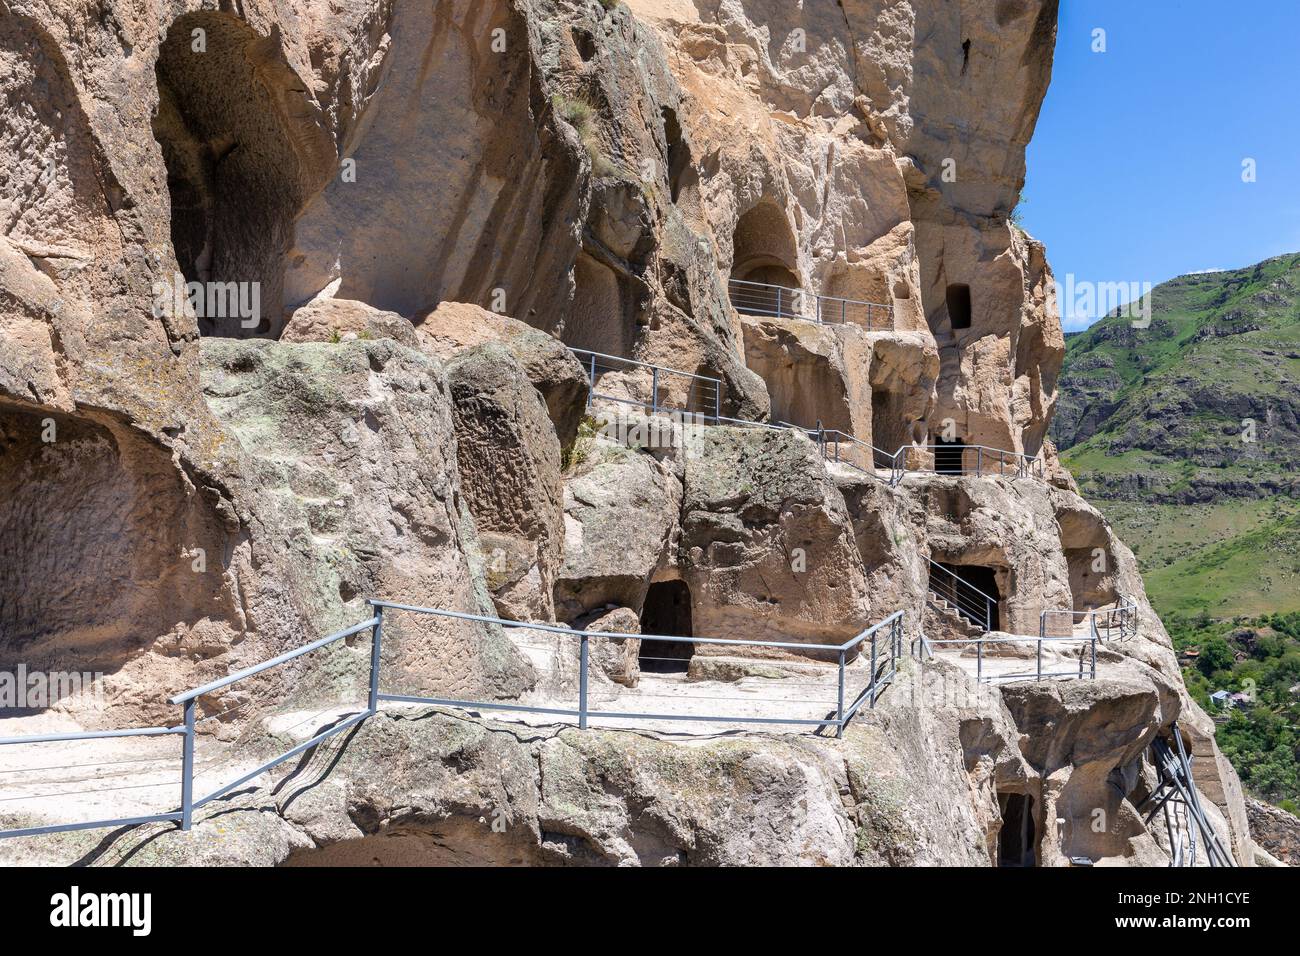 13 Cave Castles, Temples, and Buildings Carved In Mountains